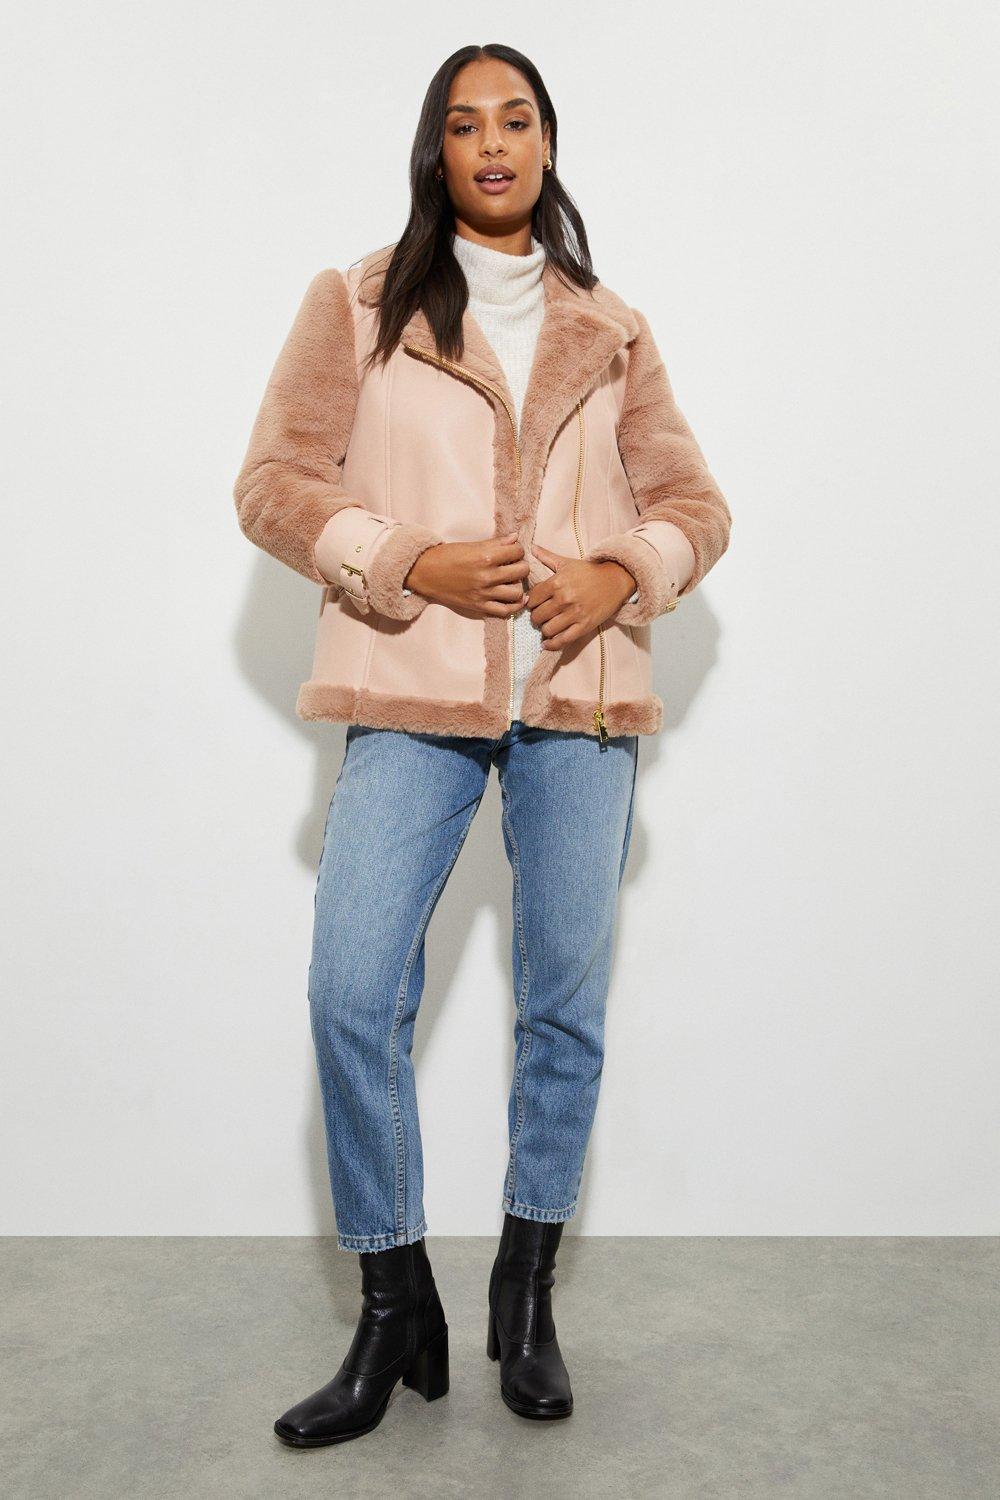 Topshop Petite Faux Leather Aviator Jacket with Light Pink Faux